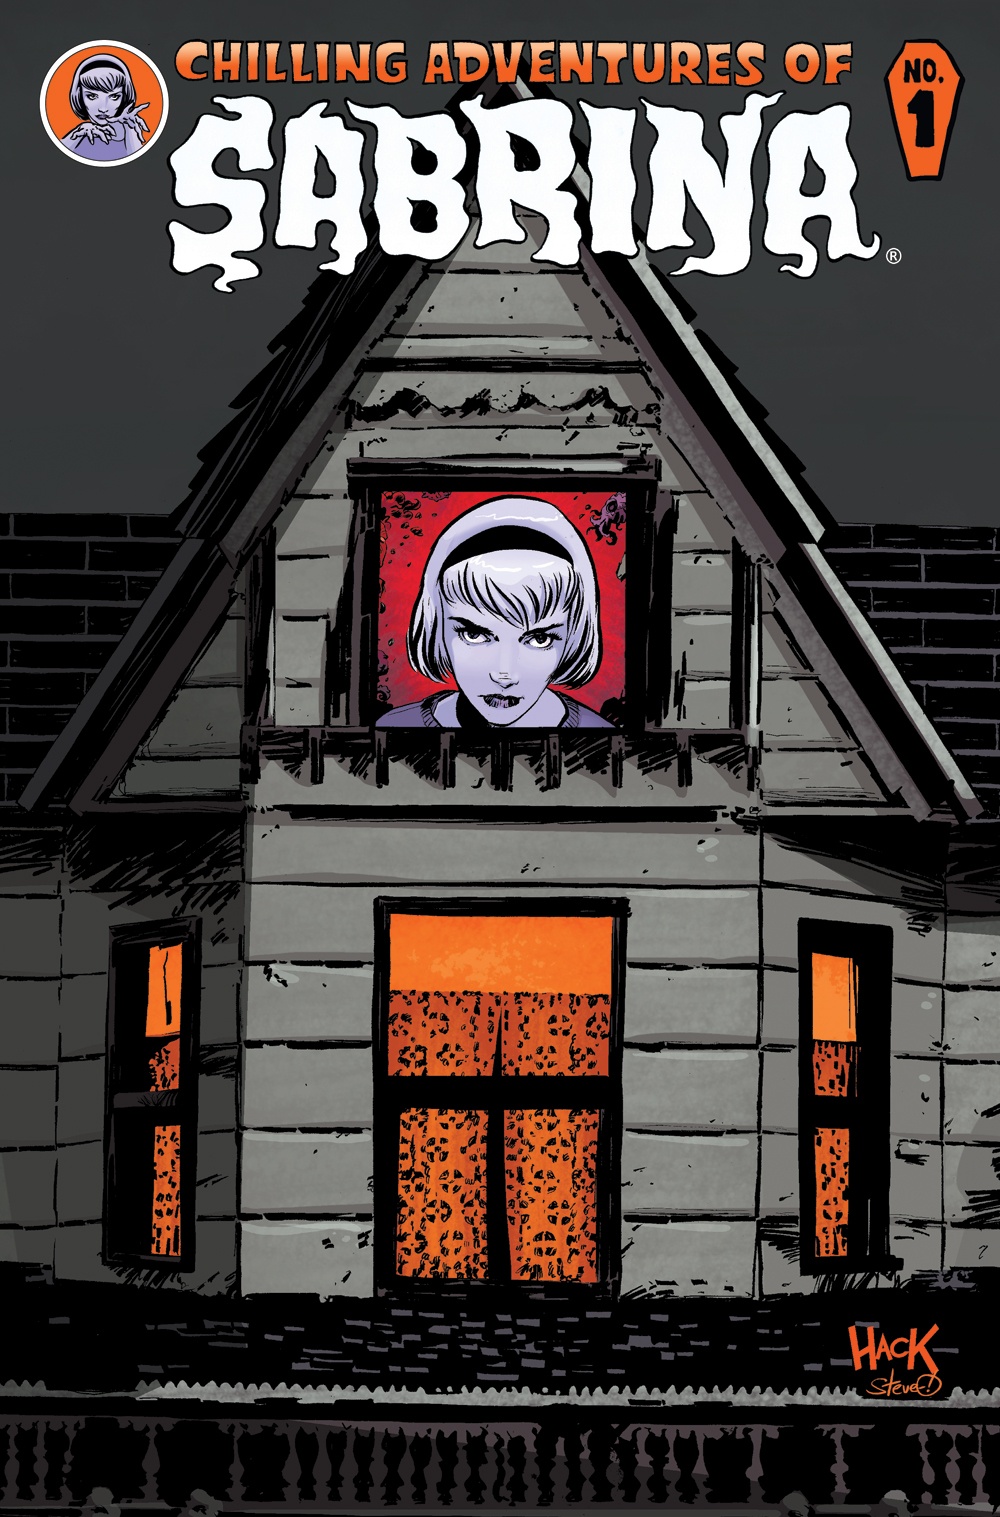 The Chilling Adventures of Sabrina No 1